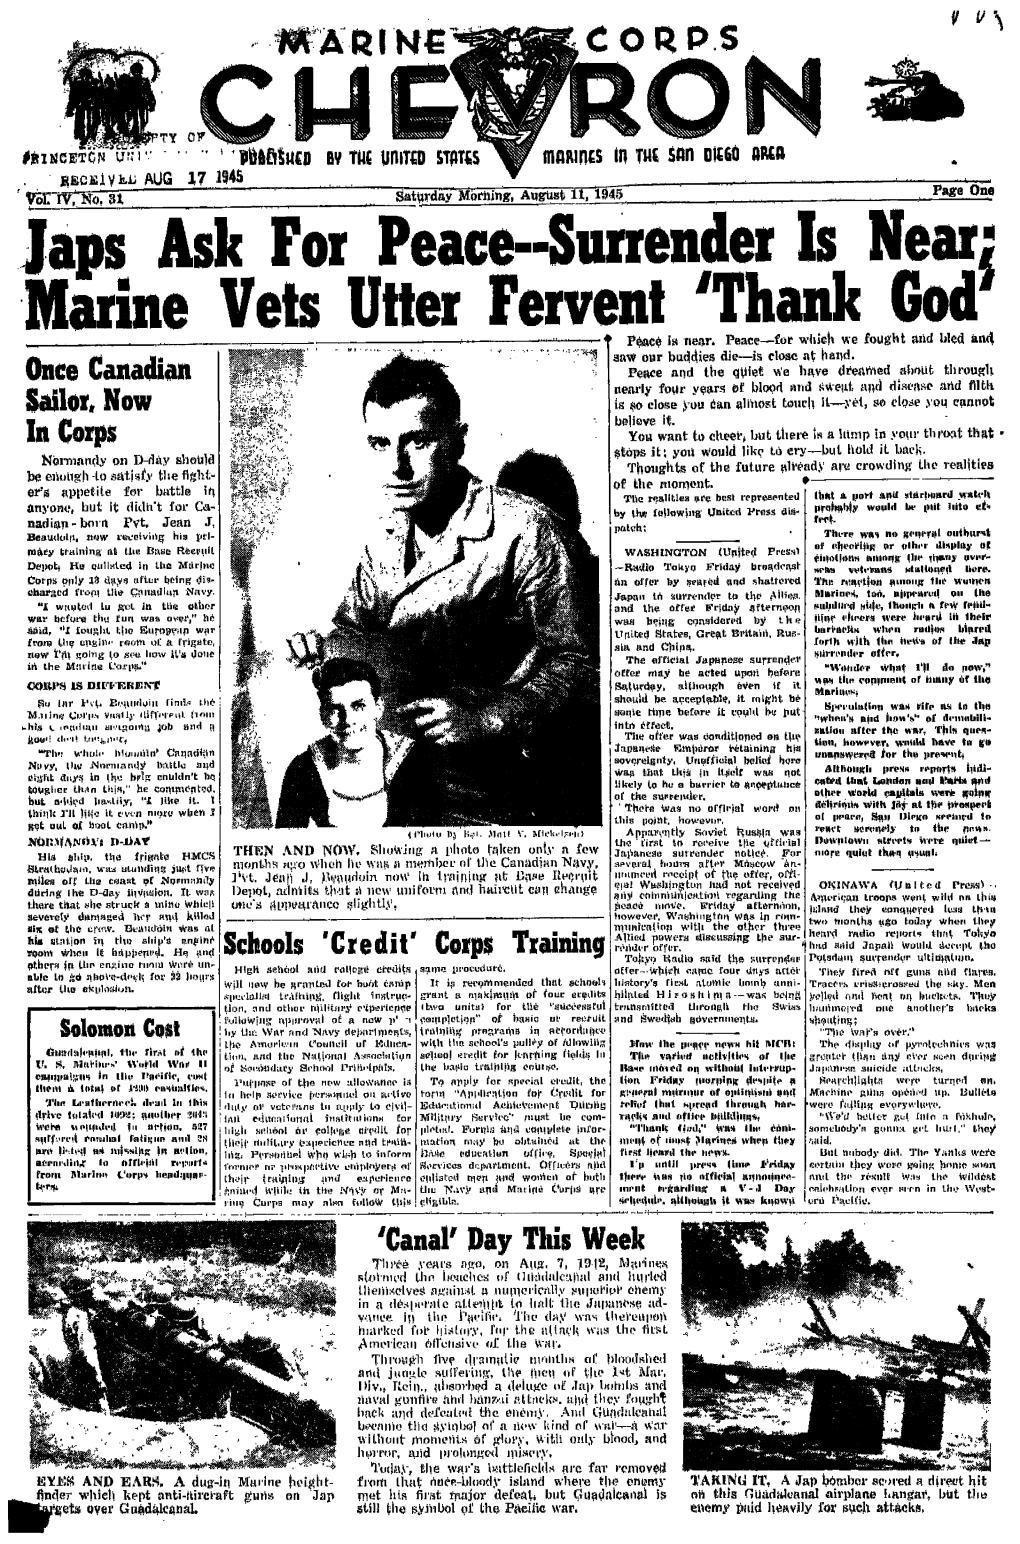 Japs Ask for Peace--Surrender Is Near; Marine Vets Utter Fervent 'Thank God' Peace Is Near